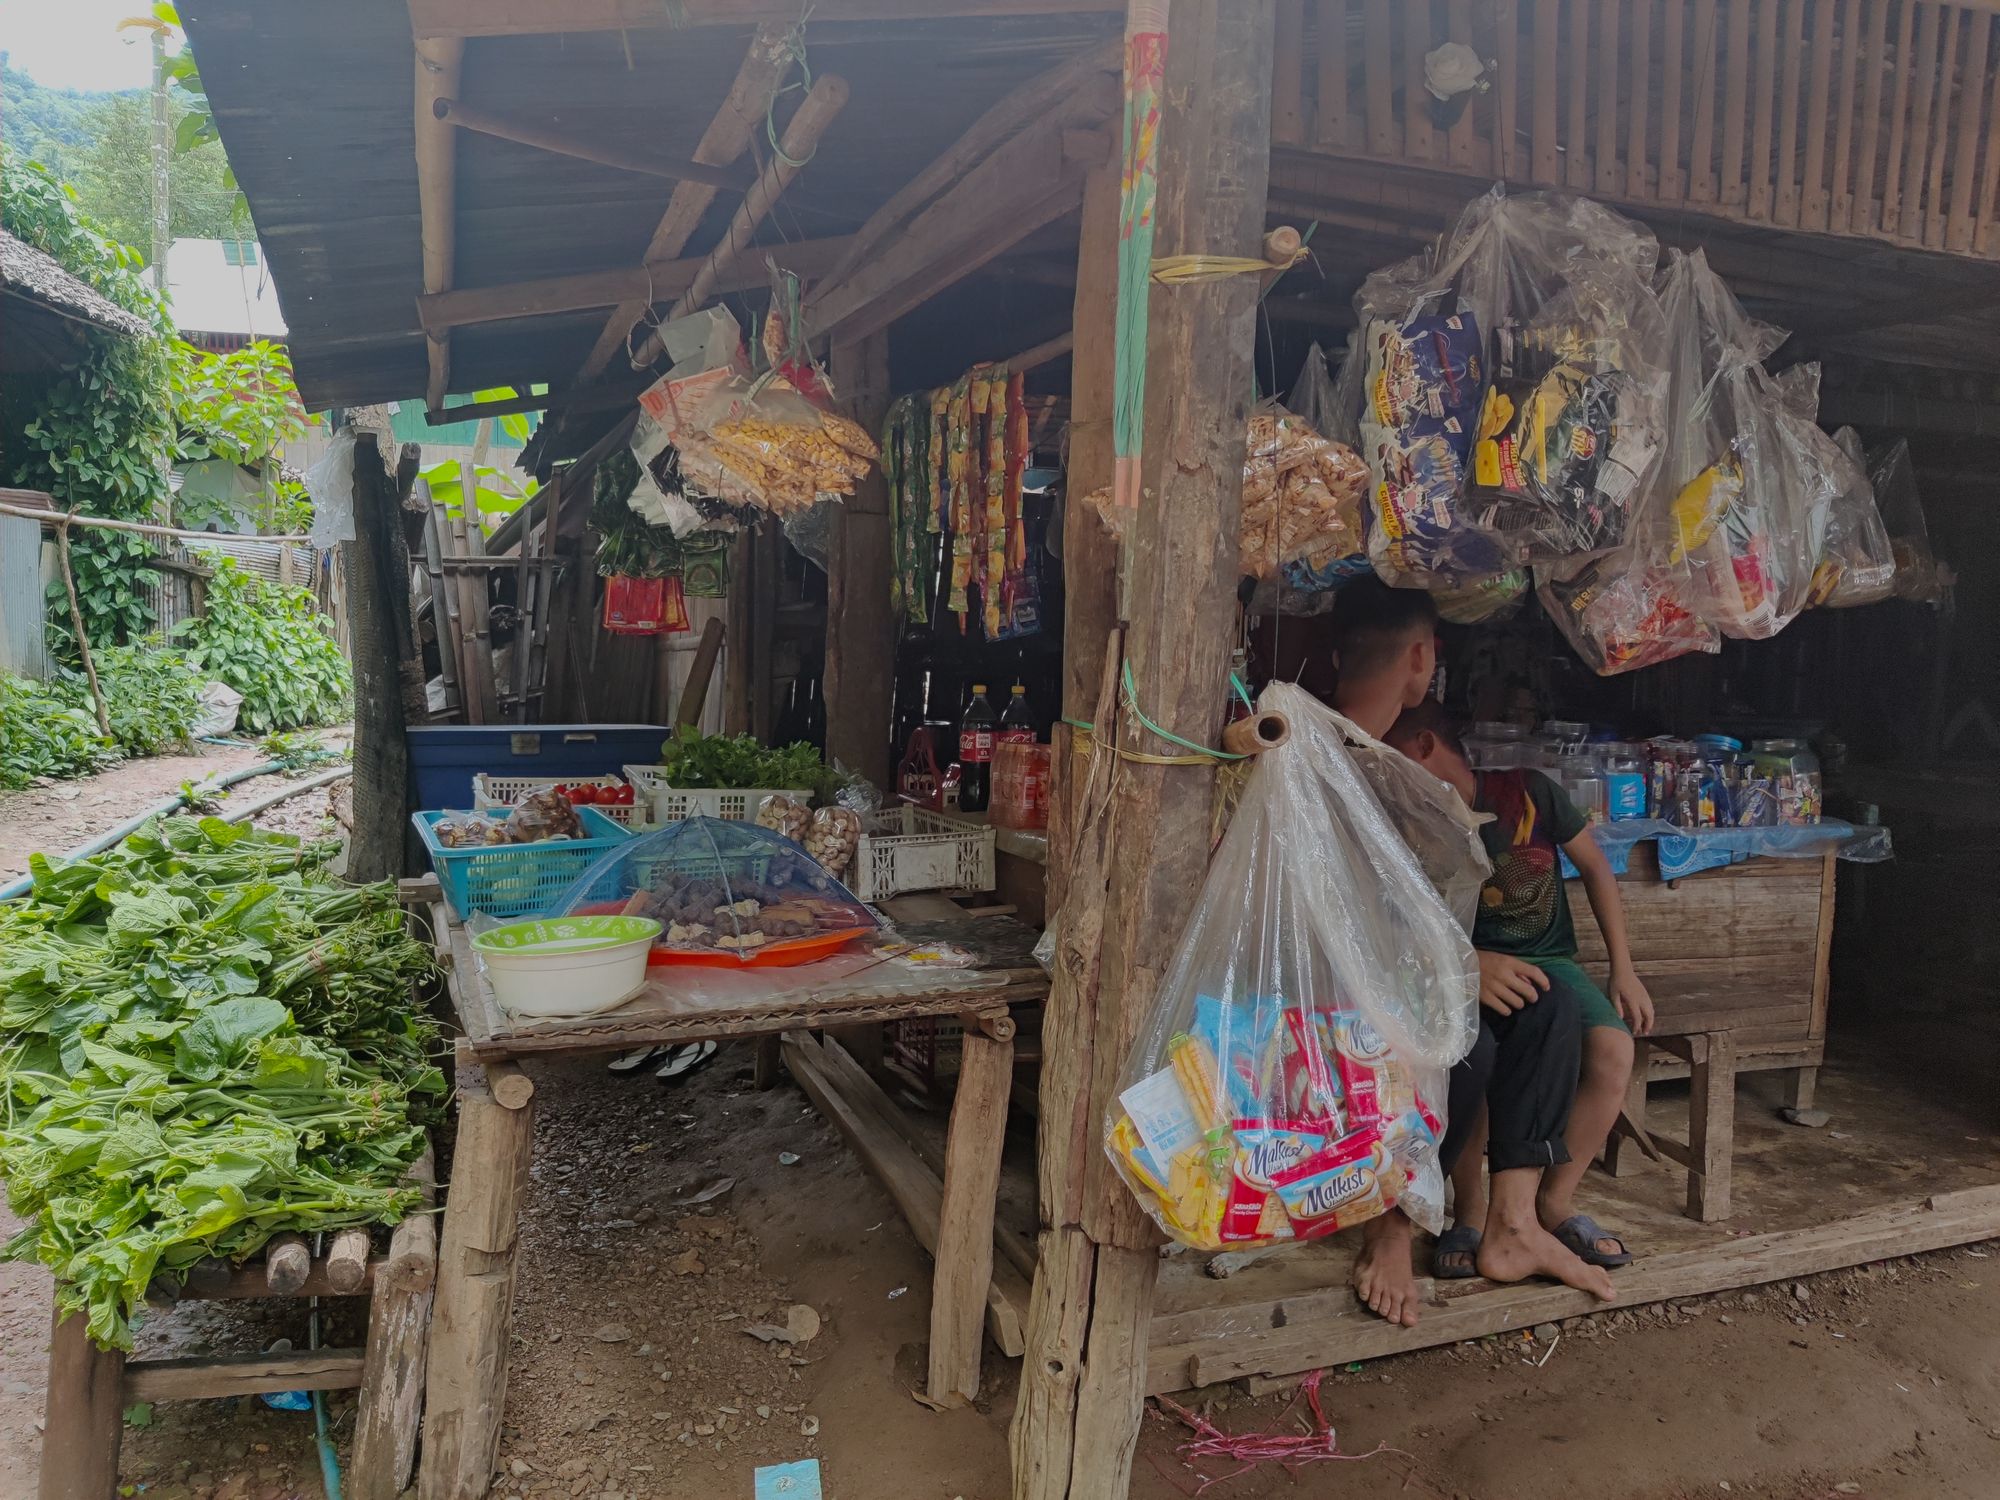 Basic necessities are sold in small shops around the camp.